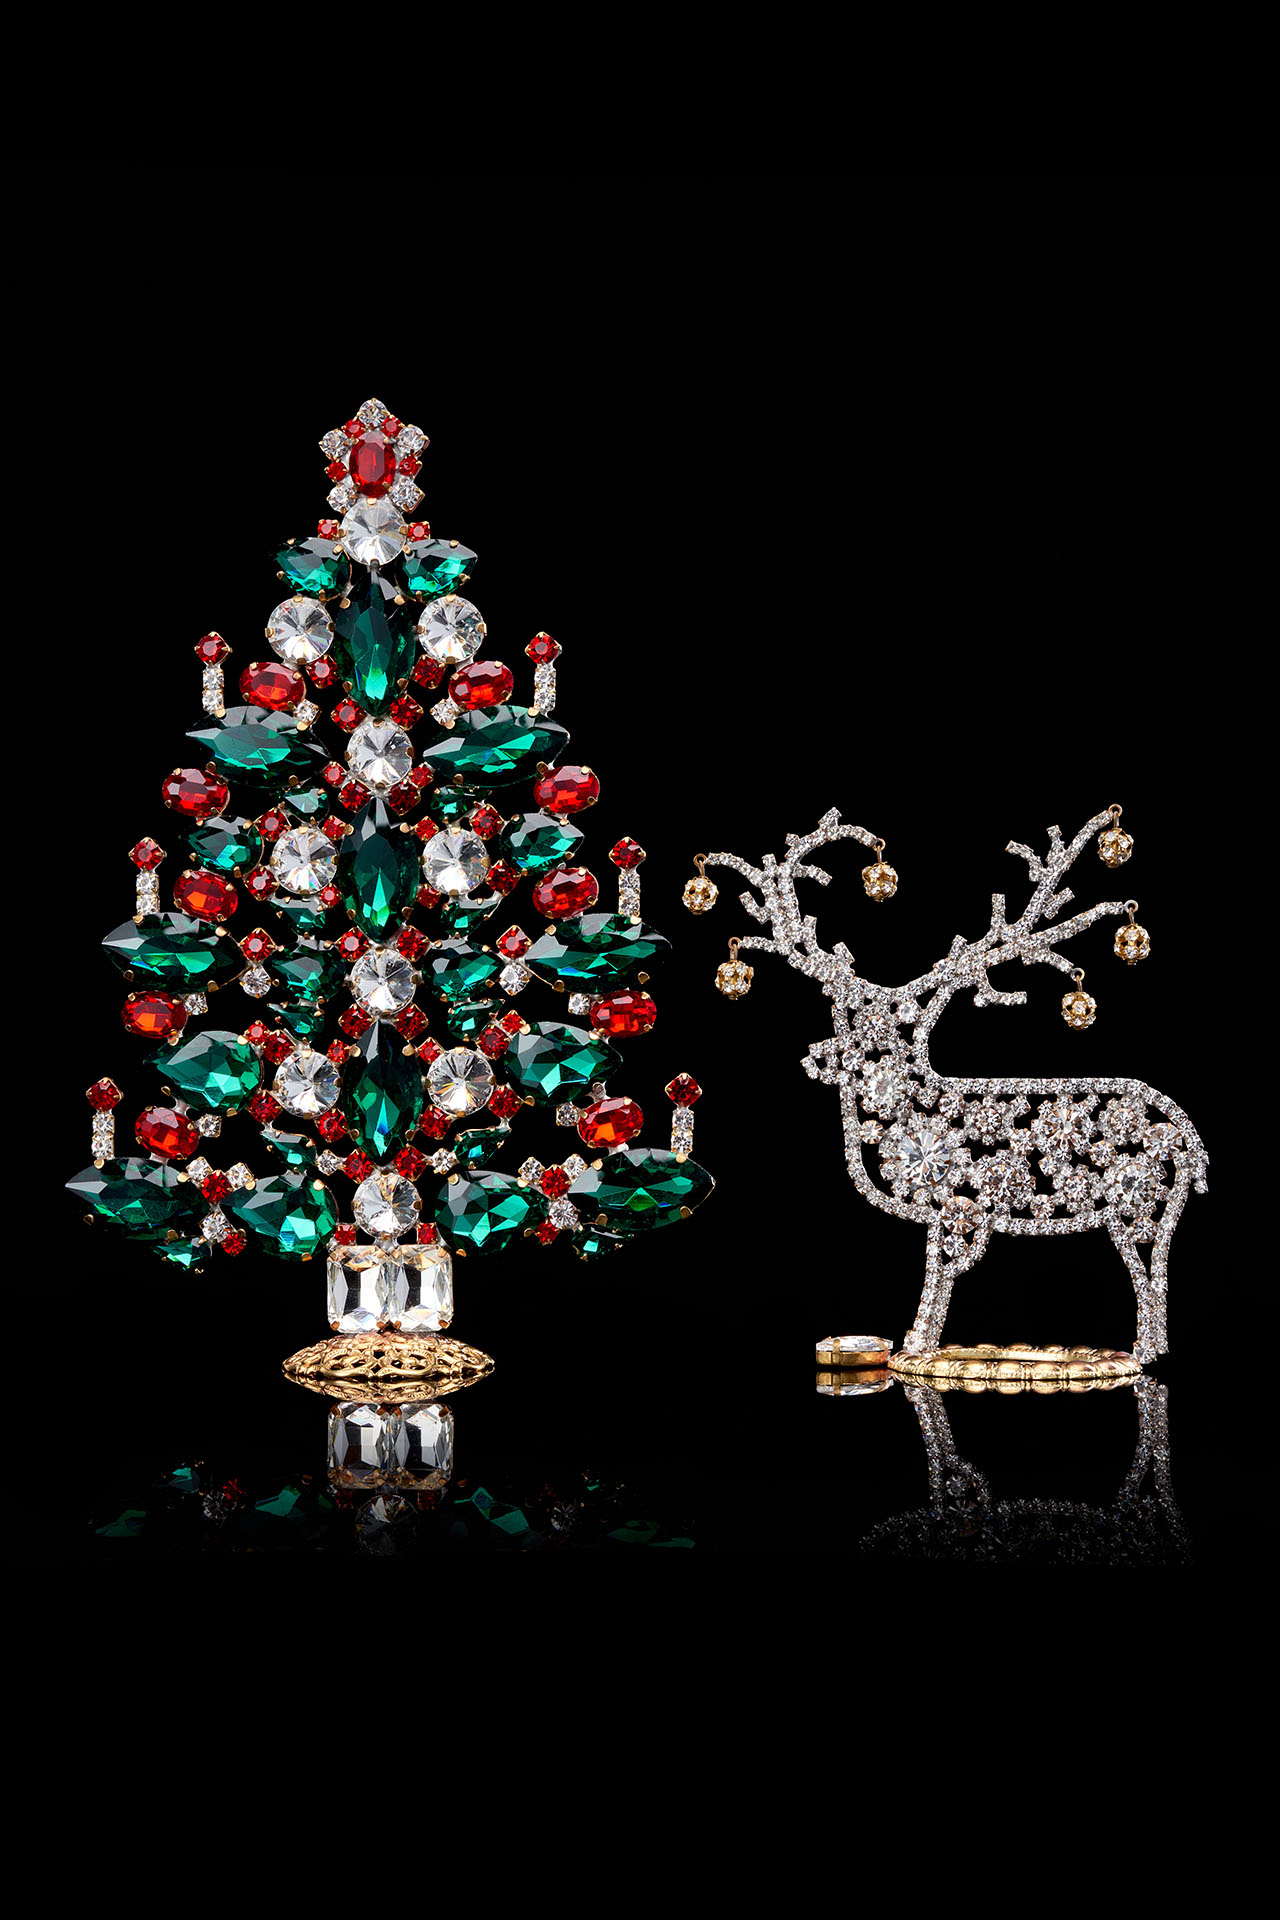 Festive table top Vintage Christmas tree and clear reindeer